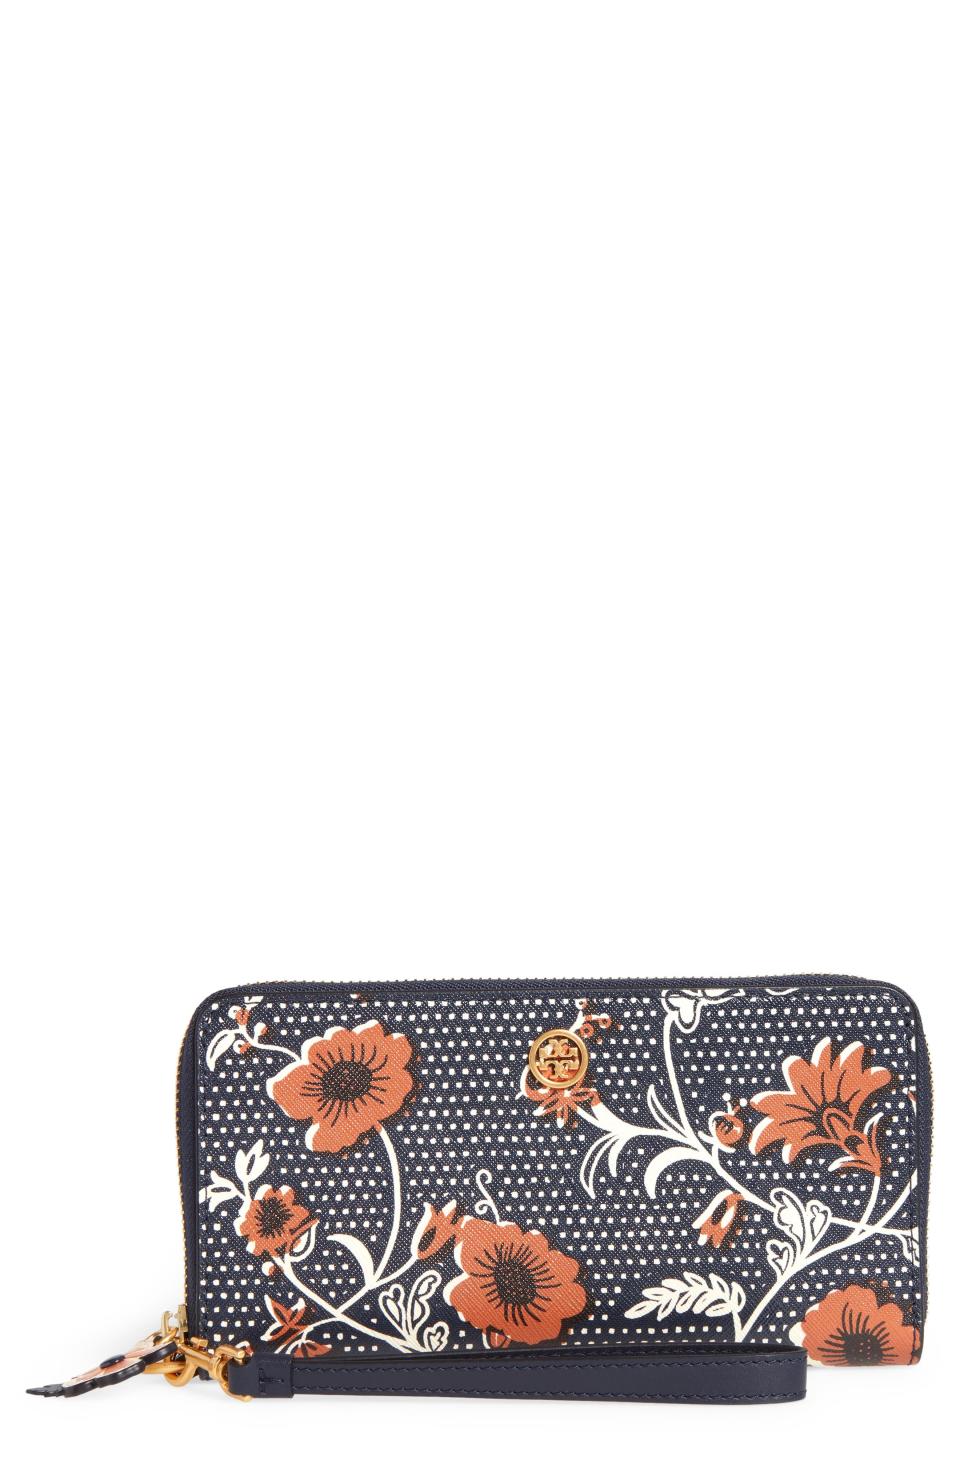 13) Tory Burch Floral Continental Leather Wallet